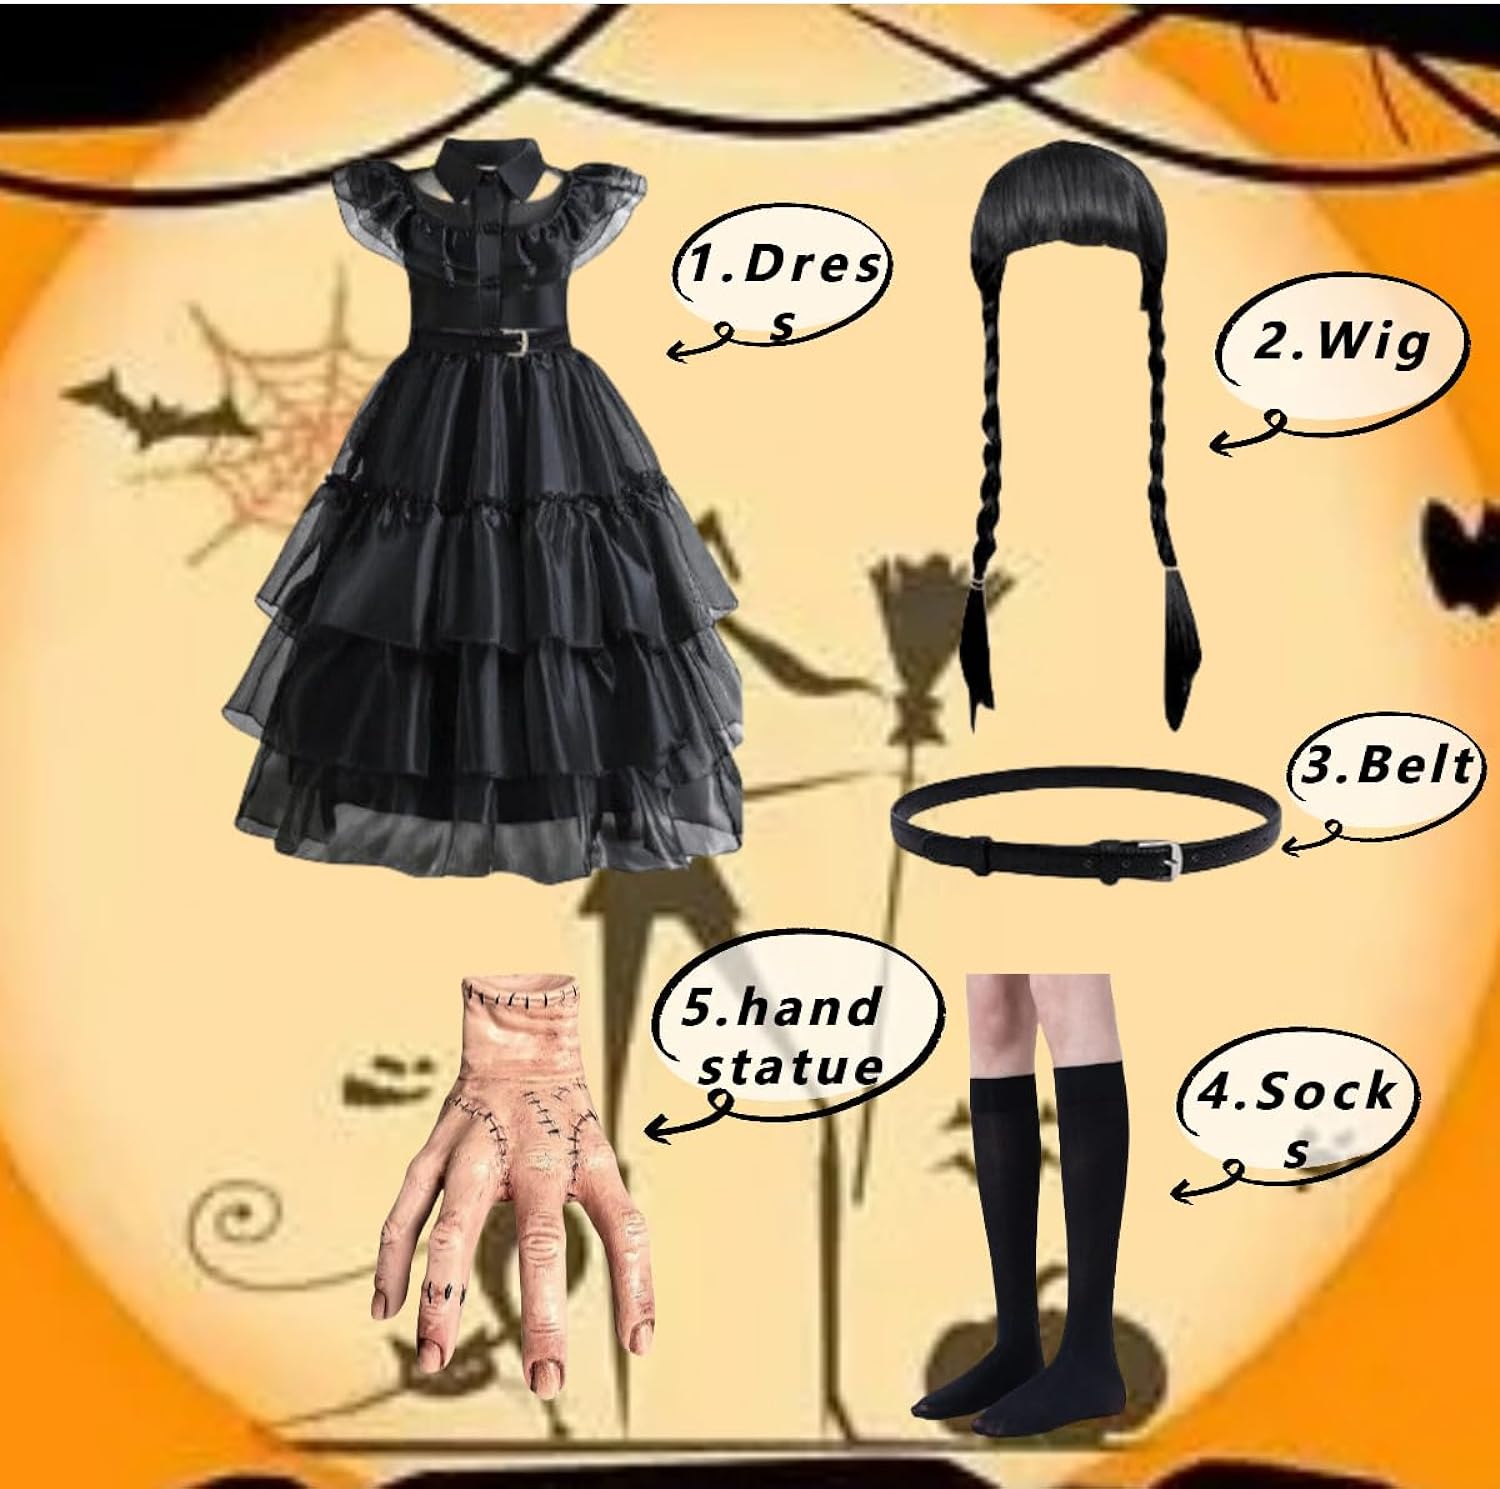 Addams Costume Dress for Girls | Kids Addams Dress with BeltThing Hand Props | Halloween Costume Cosplay Party